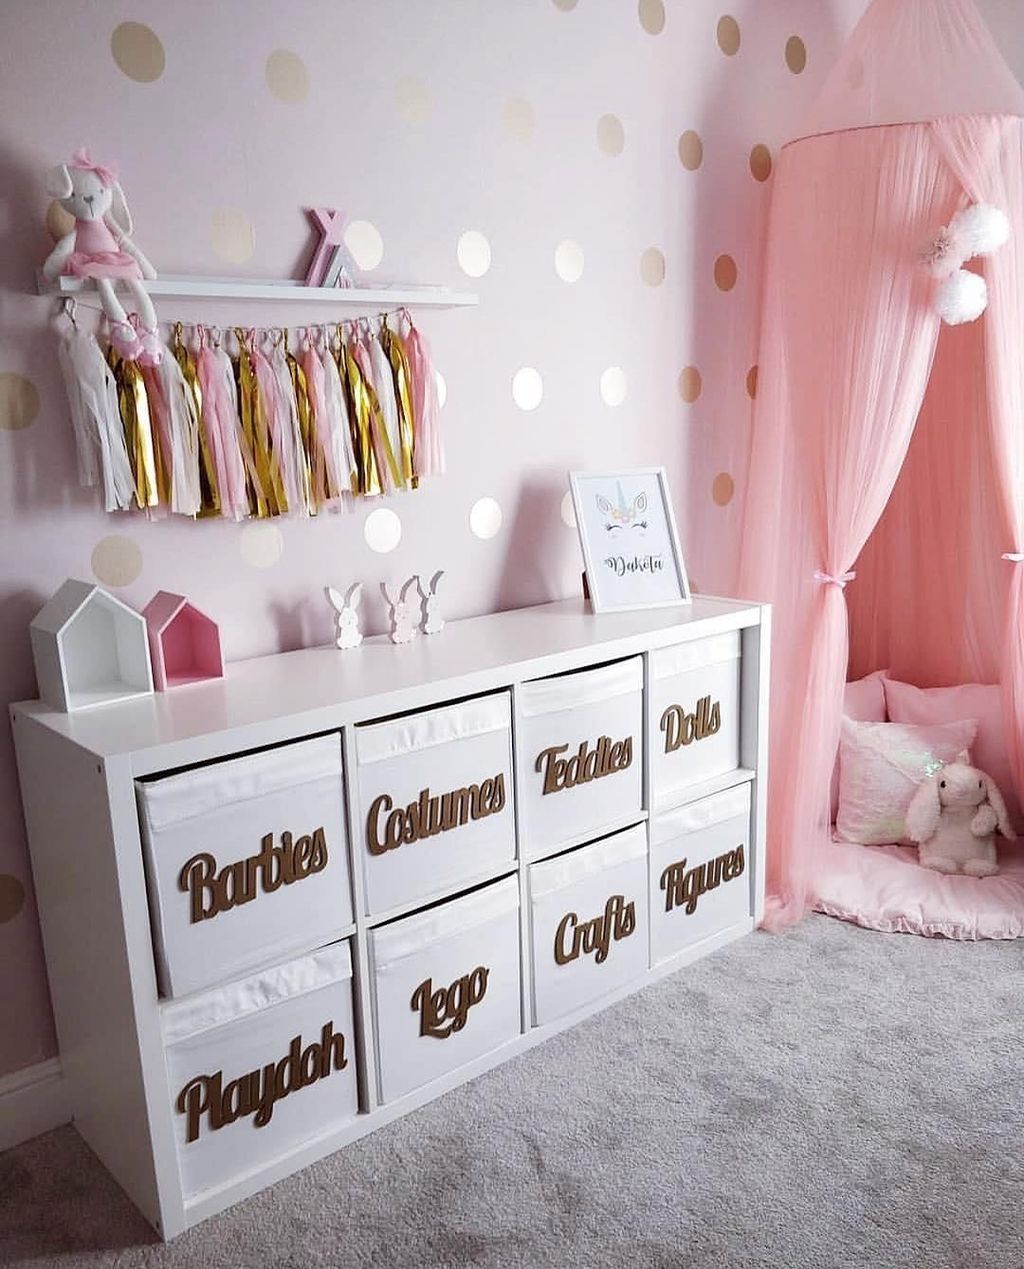 37 Affordable Kids Room Design Ideas To Inspire Today -   18 room decor for kids ideas